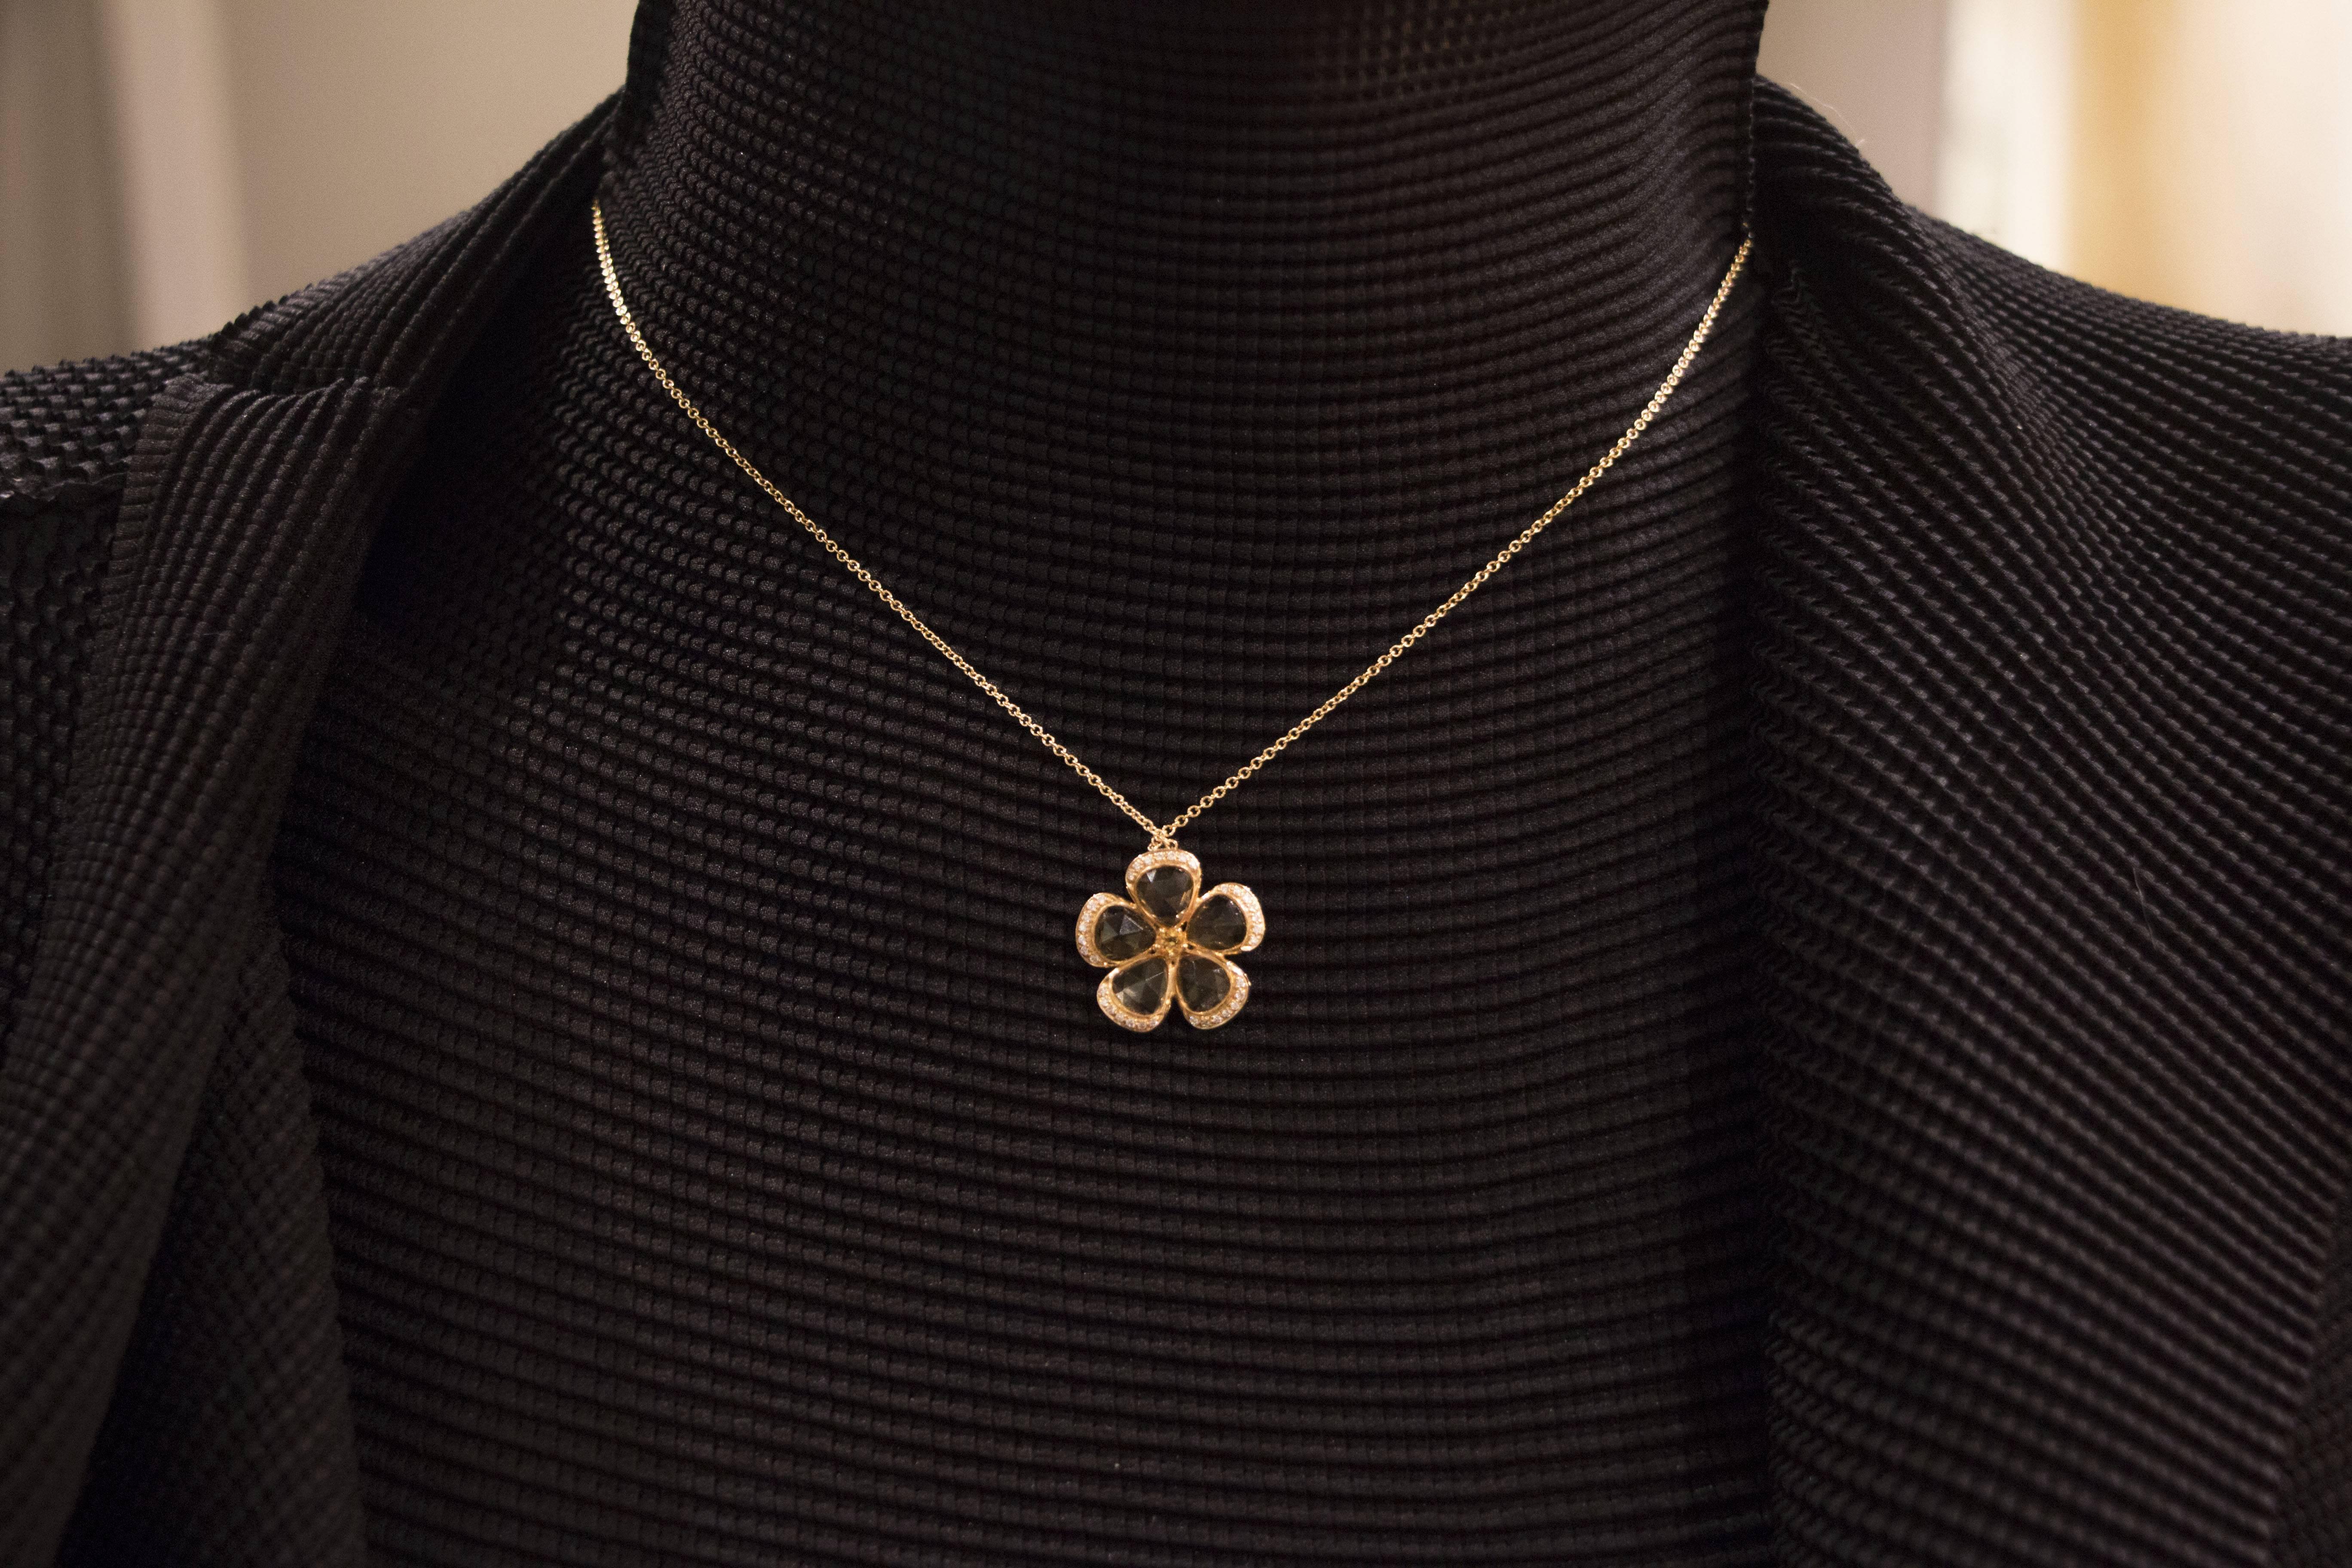 Jona design collection, hand crafted in Italy, 18 karat yellow gold flower pendant set with five citrine quartz petals weighing 3.97 carats in total and white diamonds weighing 0.14 carats, suspended by a 18 karat yellow gold chain 16.5